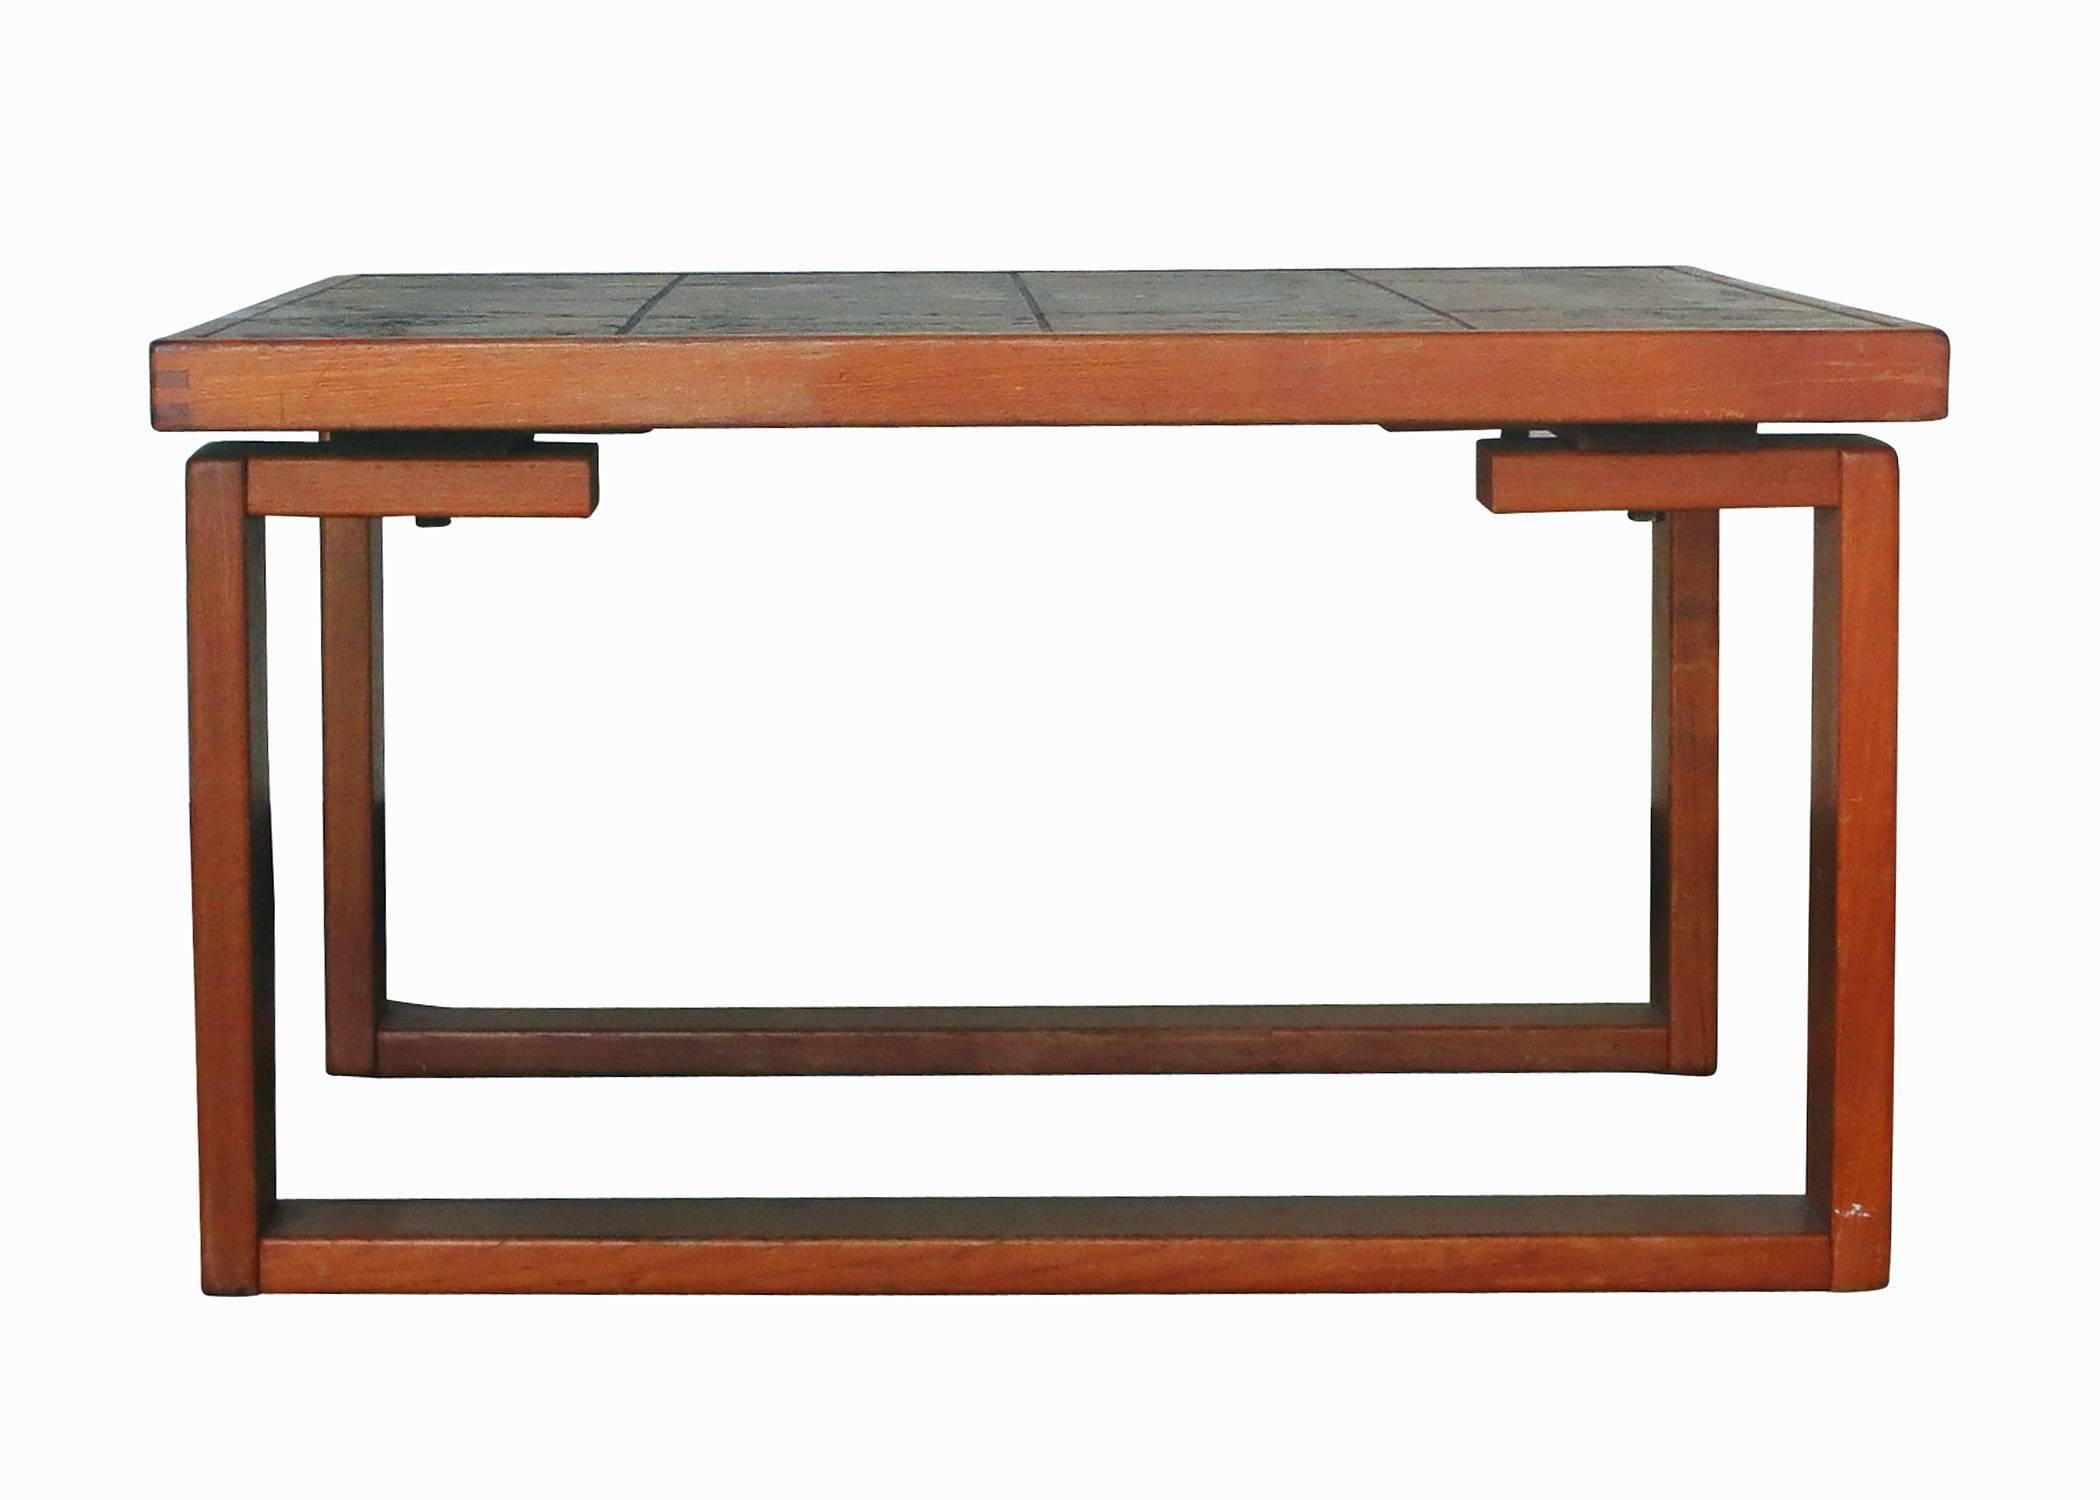 Solid teak table with U shaped legs and textured clay art tile top. The Tile mosaic top is made of cream, red,  brown and green come together in a abstract pattern and sits on a set of off set legs which give the table an almost  floating